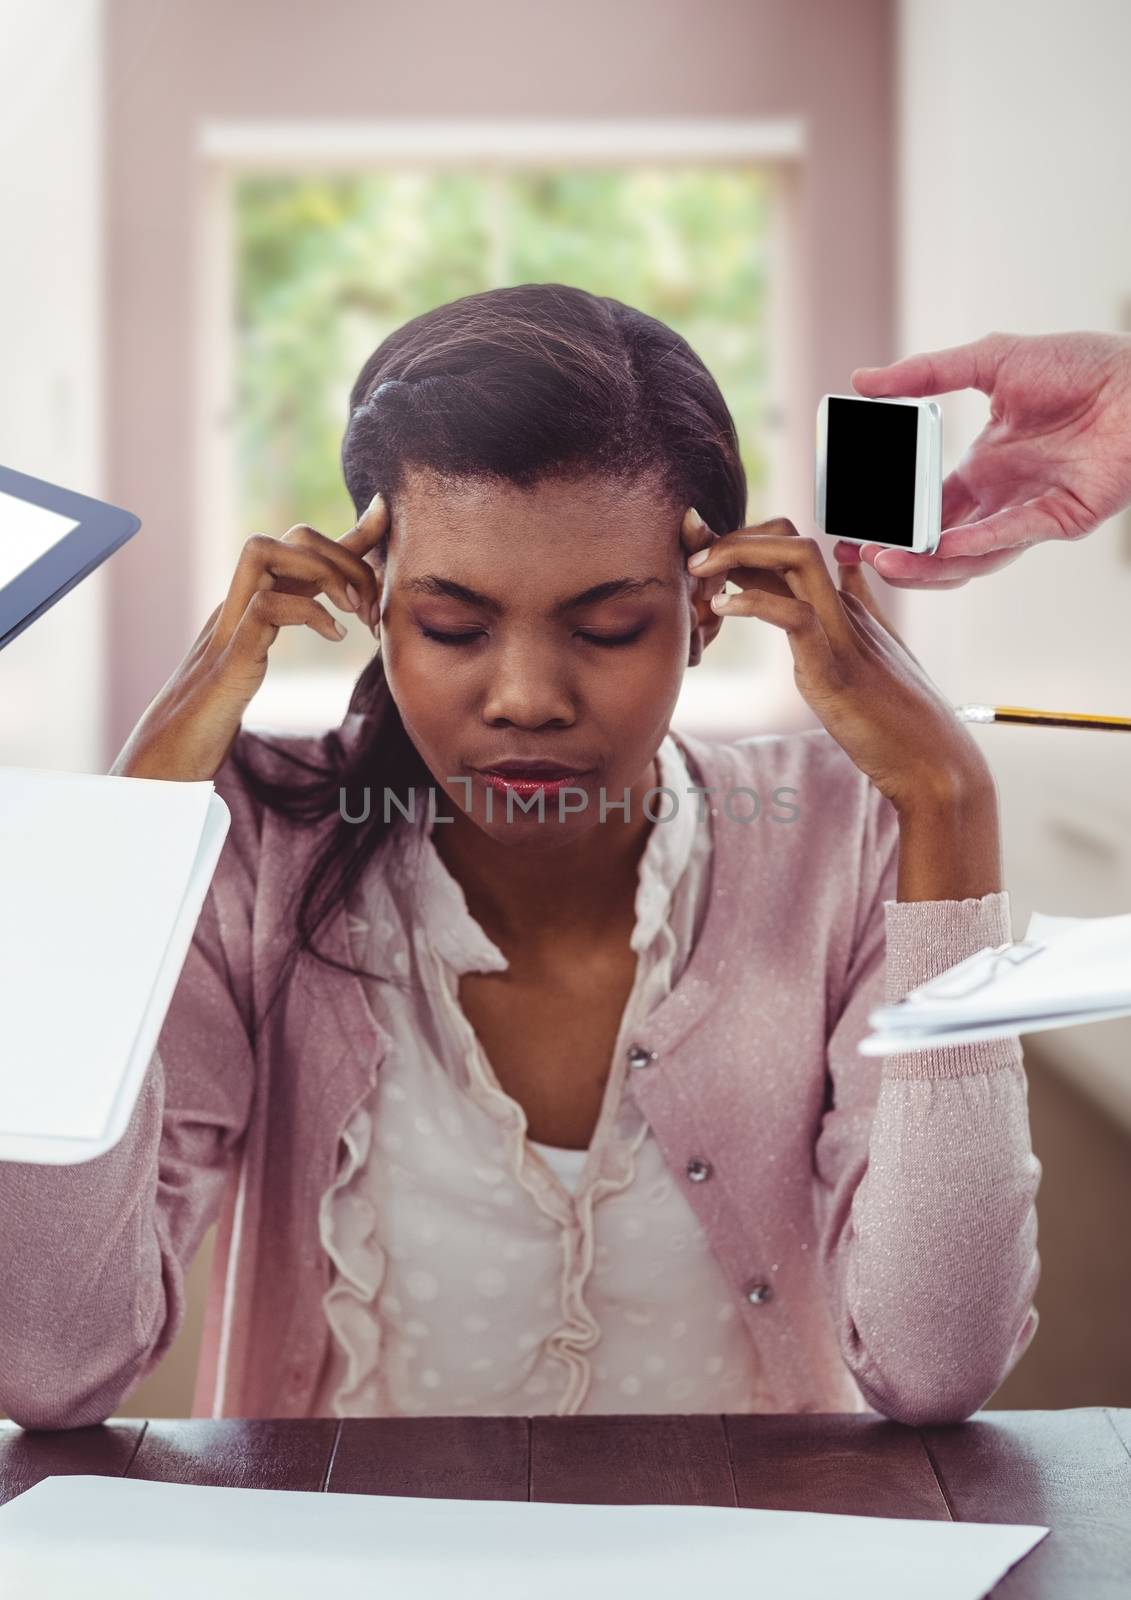 Stressed woman at desk surrounded by nuisances of technology and paperwork by Wavebreakmedia